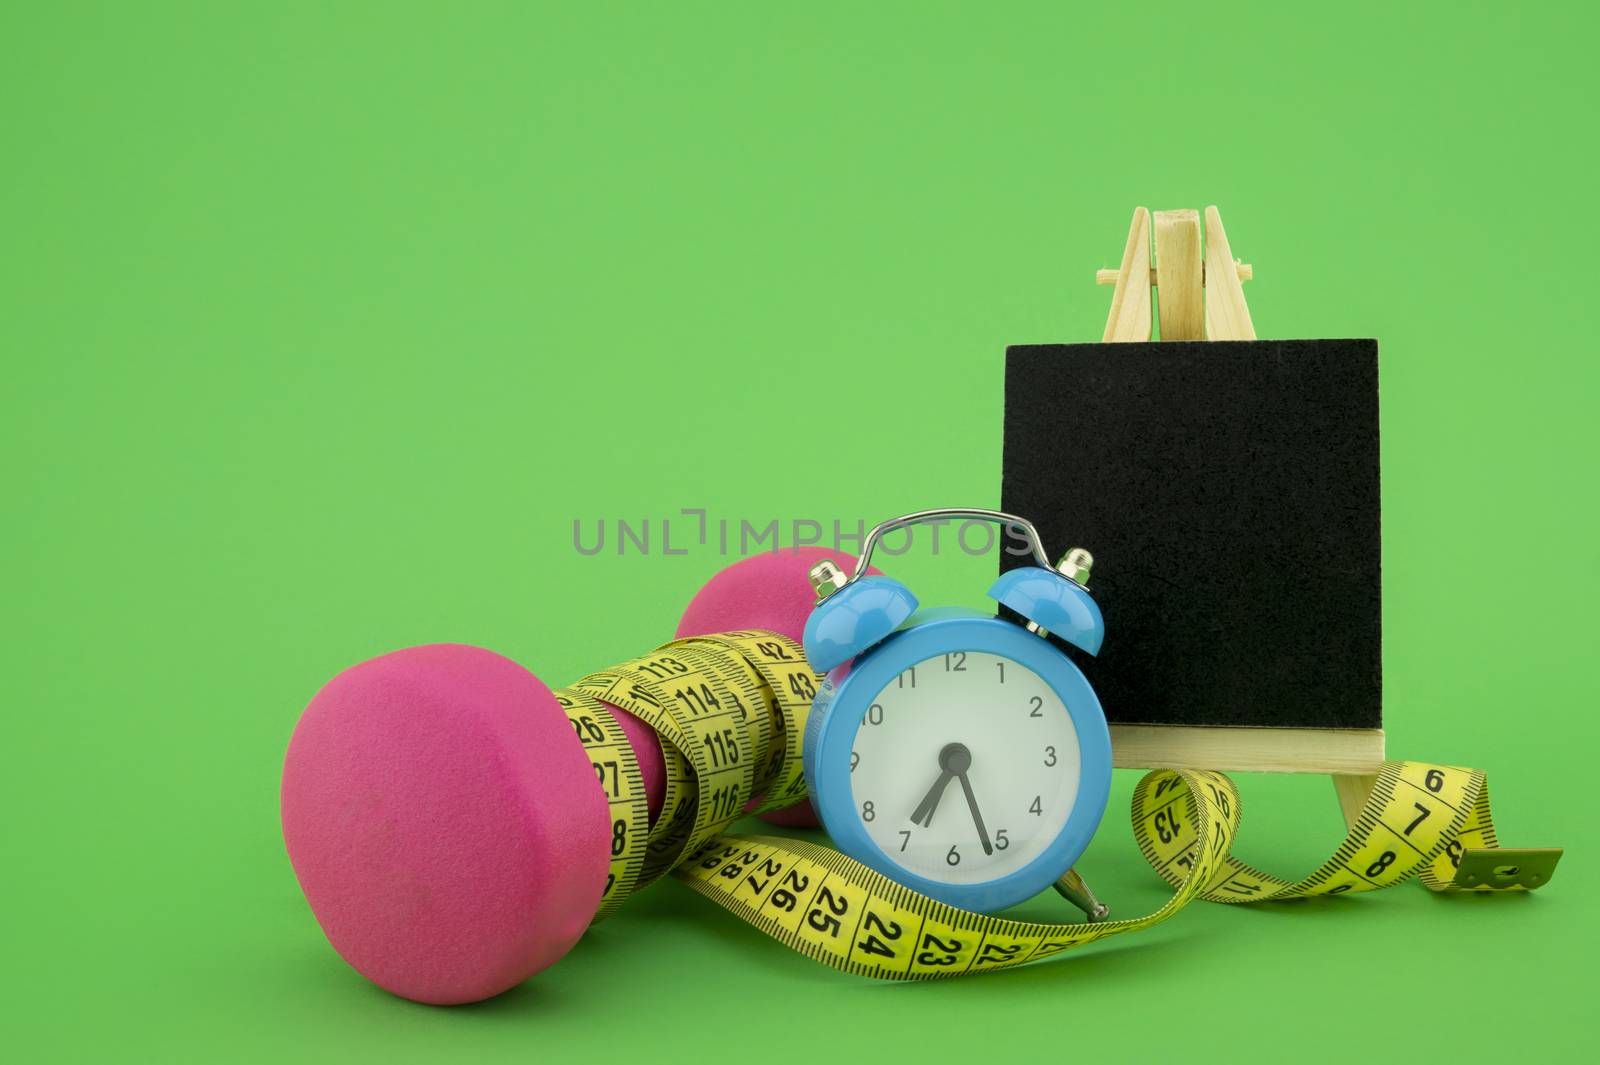 Starting healthy lifestyle concept. Still life with pink dumbbell, measuring tape, chalkboard and alarm clock on green background